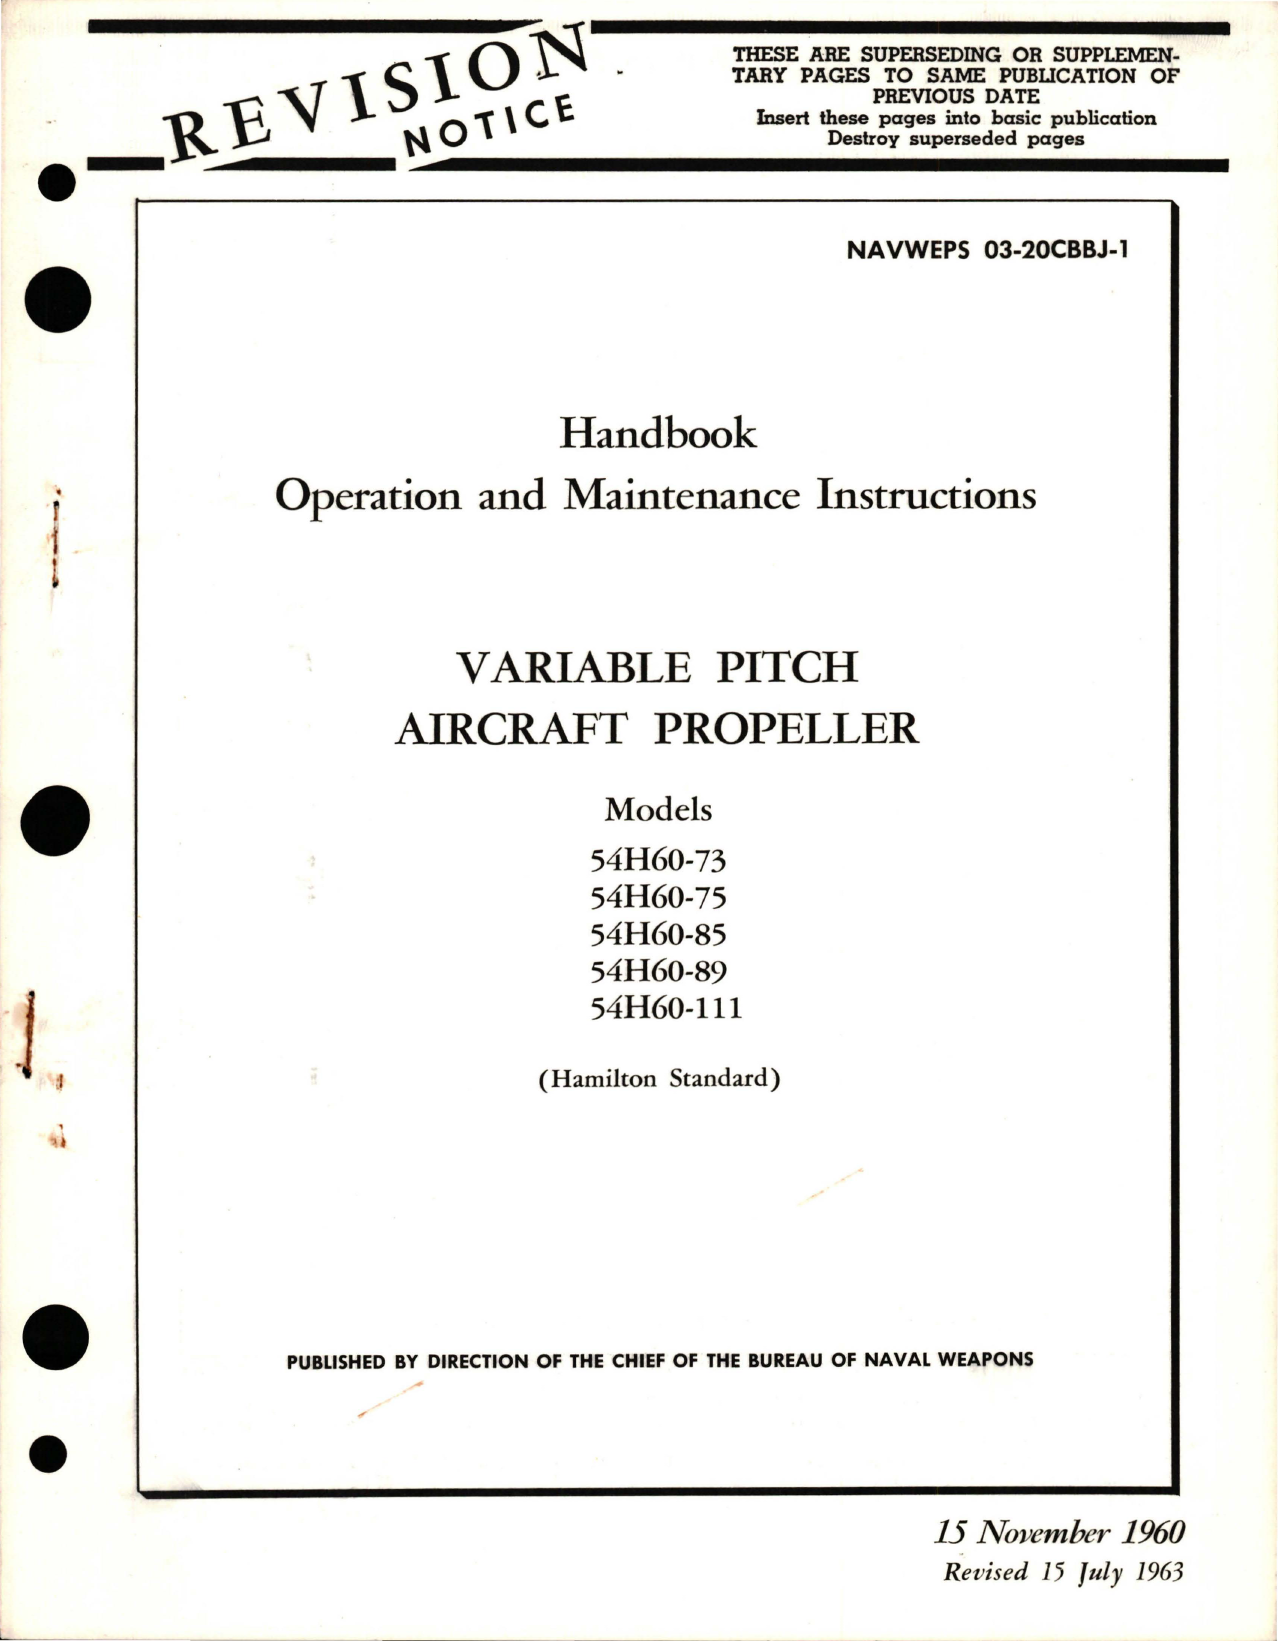 Sample page 1 from AirCorps Library document: Operation and Maintenance Instructions for Variable Pitch Propeller - Models 54H60-73, 54H60-75, 54H60-85, 54H60-89, and 54H60-111 